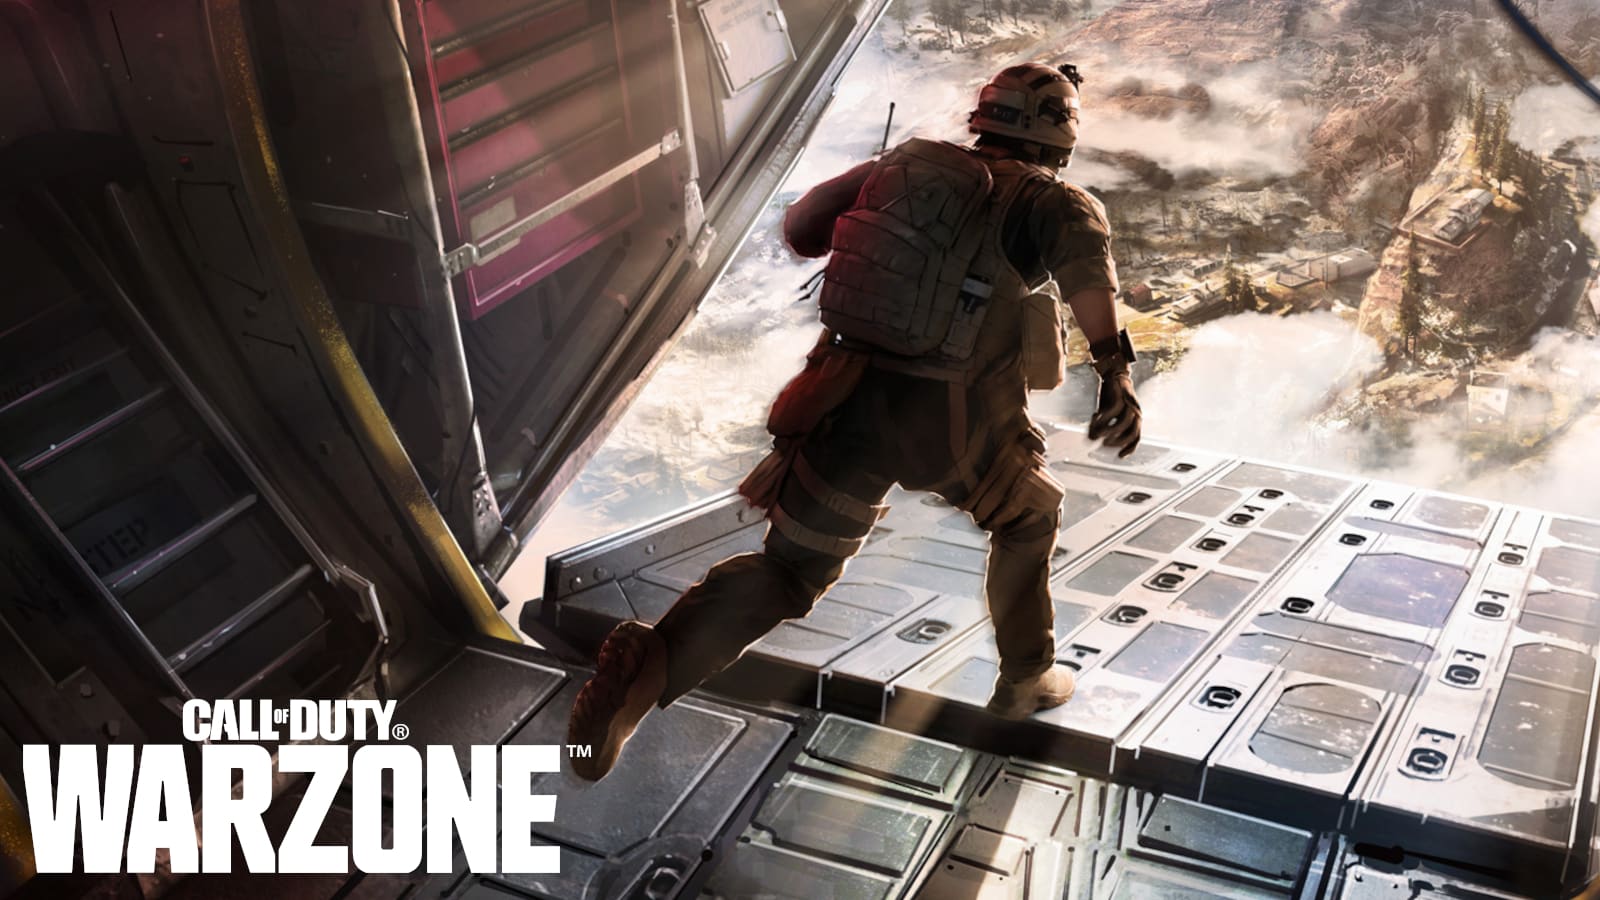 NEW* Warzone Mobile Early Access? + How To Download + Free Rewards & more!  Warzone Mobile News 